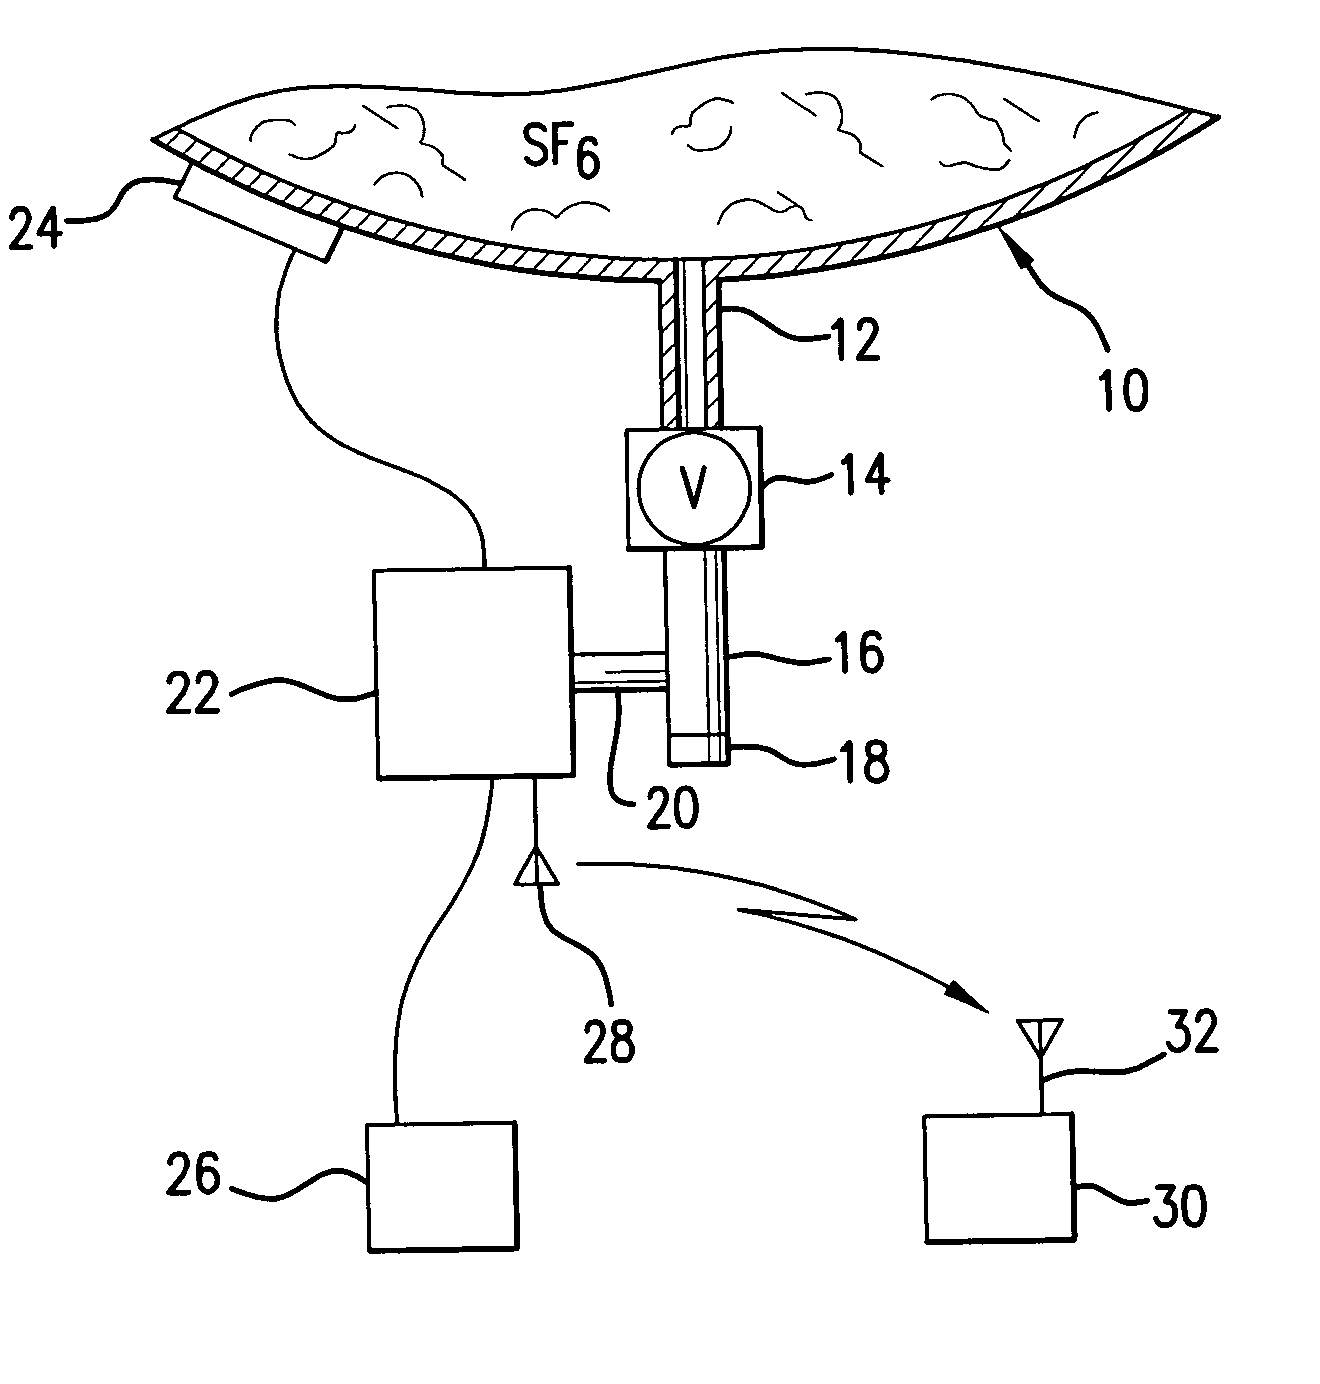 Method and apparatus for monitoring SF6 gas and electric utility apparatus